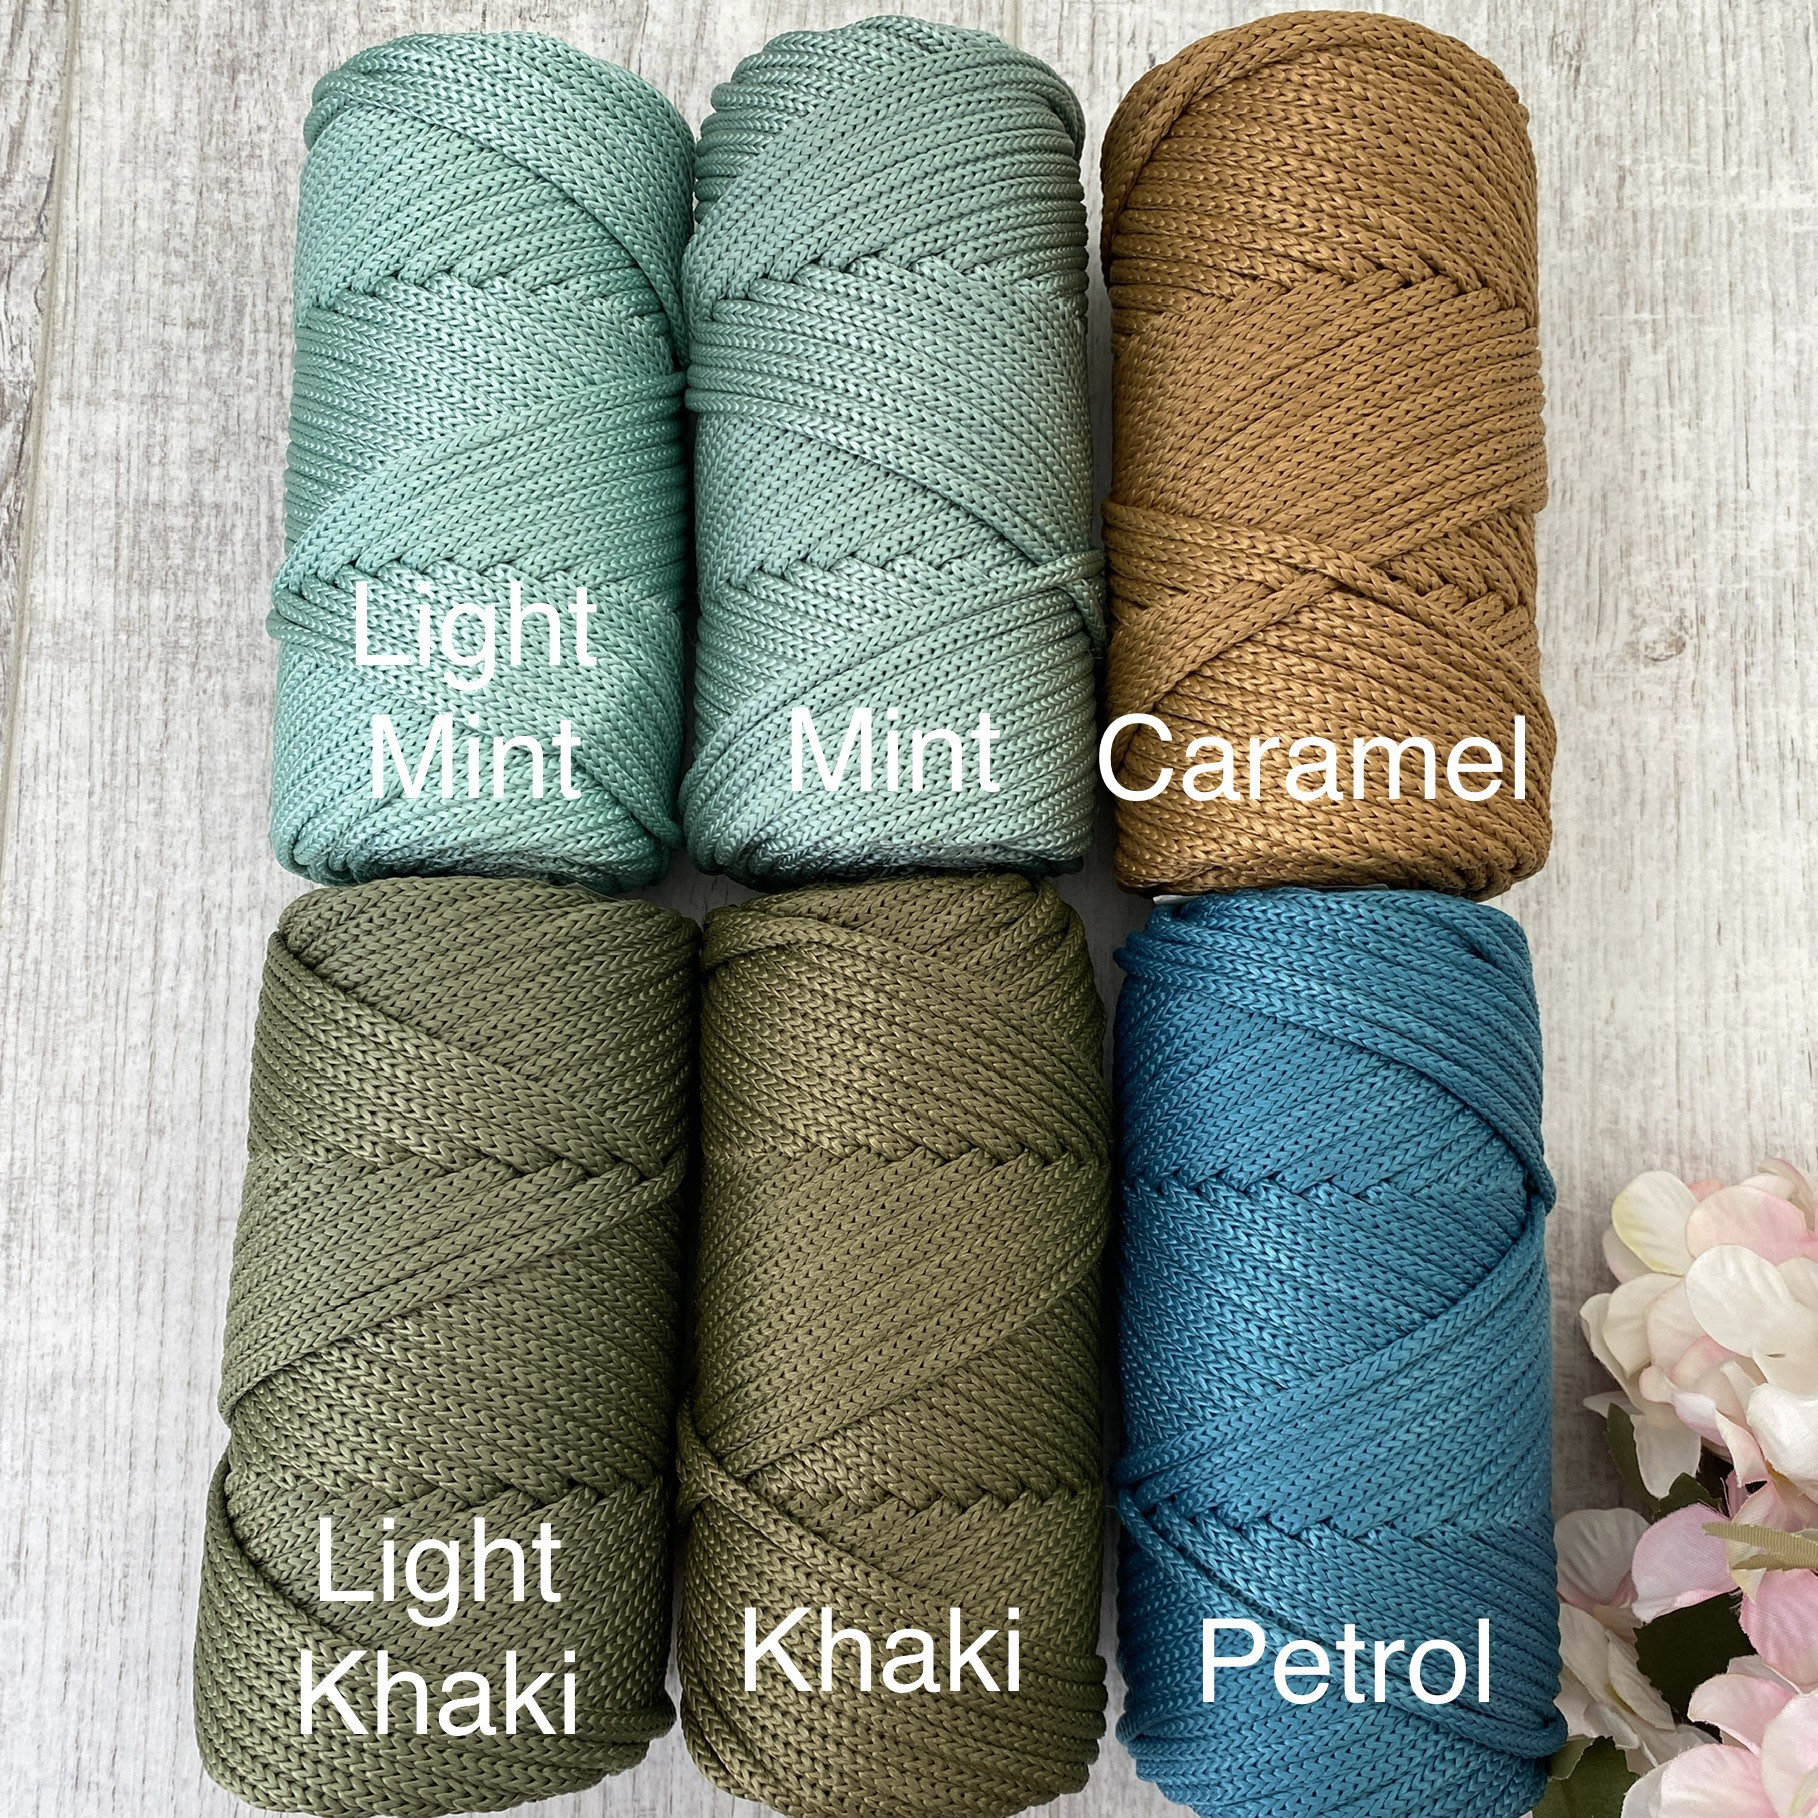 Likeecords 4mm Polyester Braided Macrame Cord 130m,Elastic Yarn for  Crocheting Bag Cord for Crafts,Plant